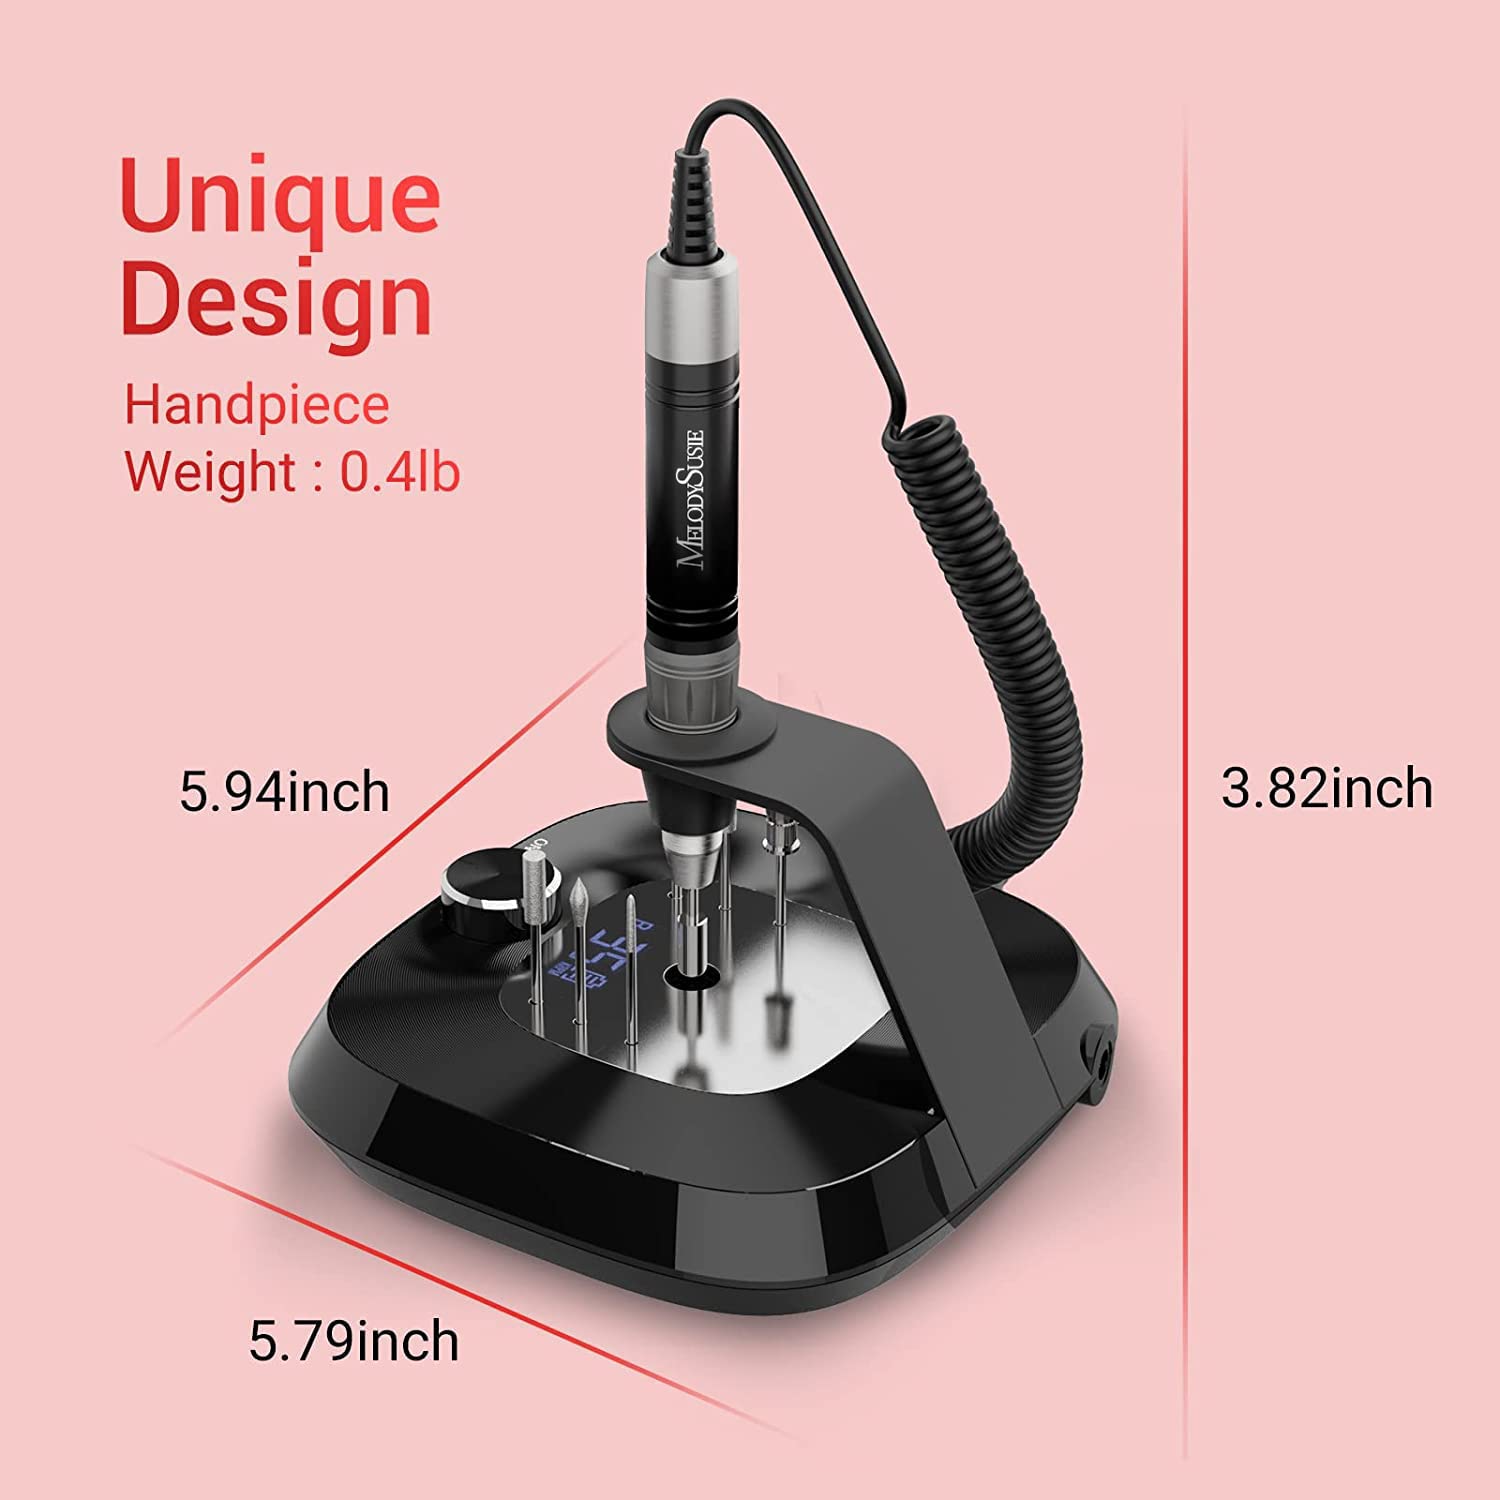 MR3-Kanon Rechargeable Nail Drill 35,000 RPM-Customized